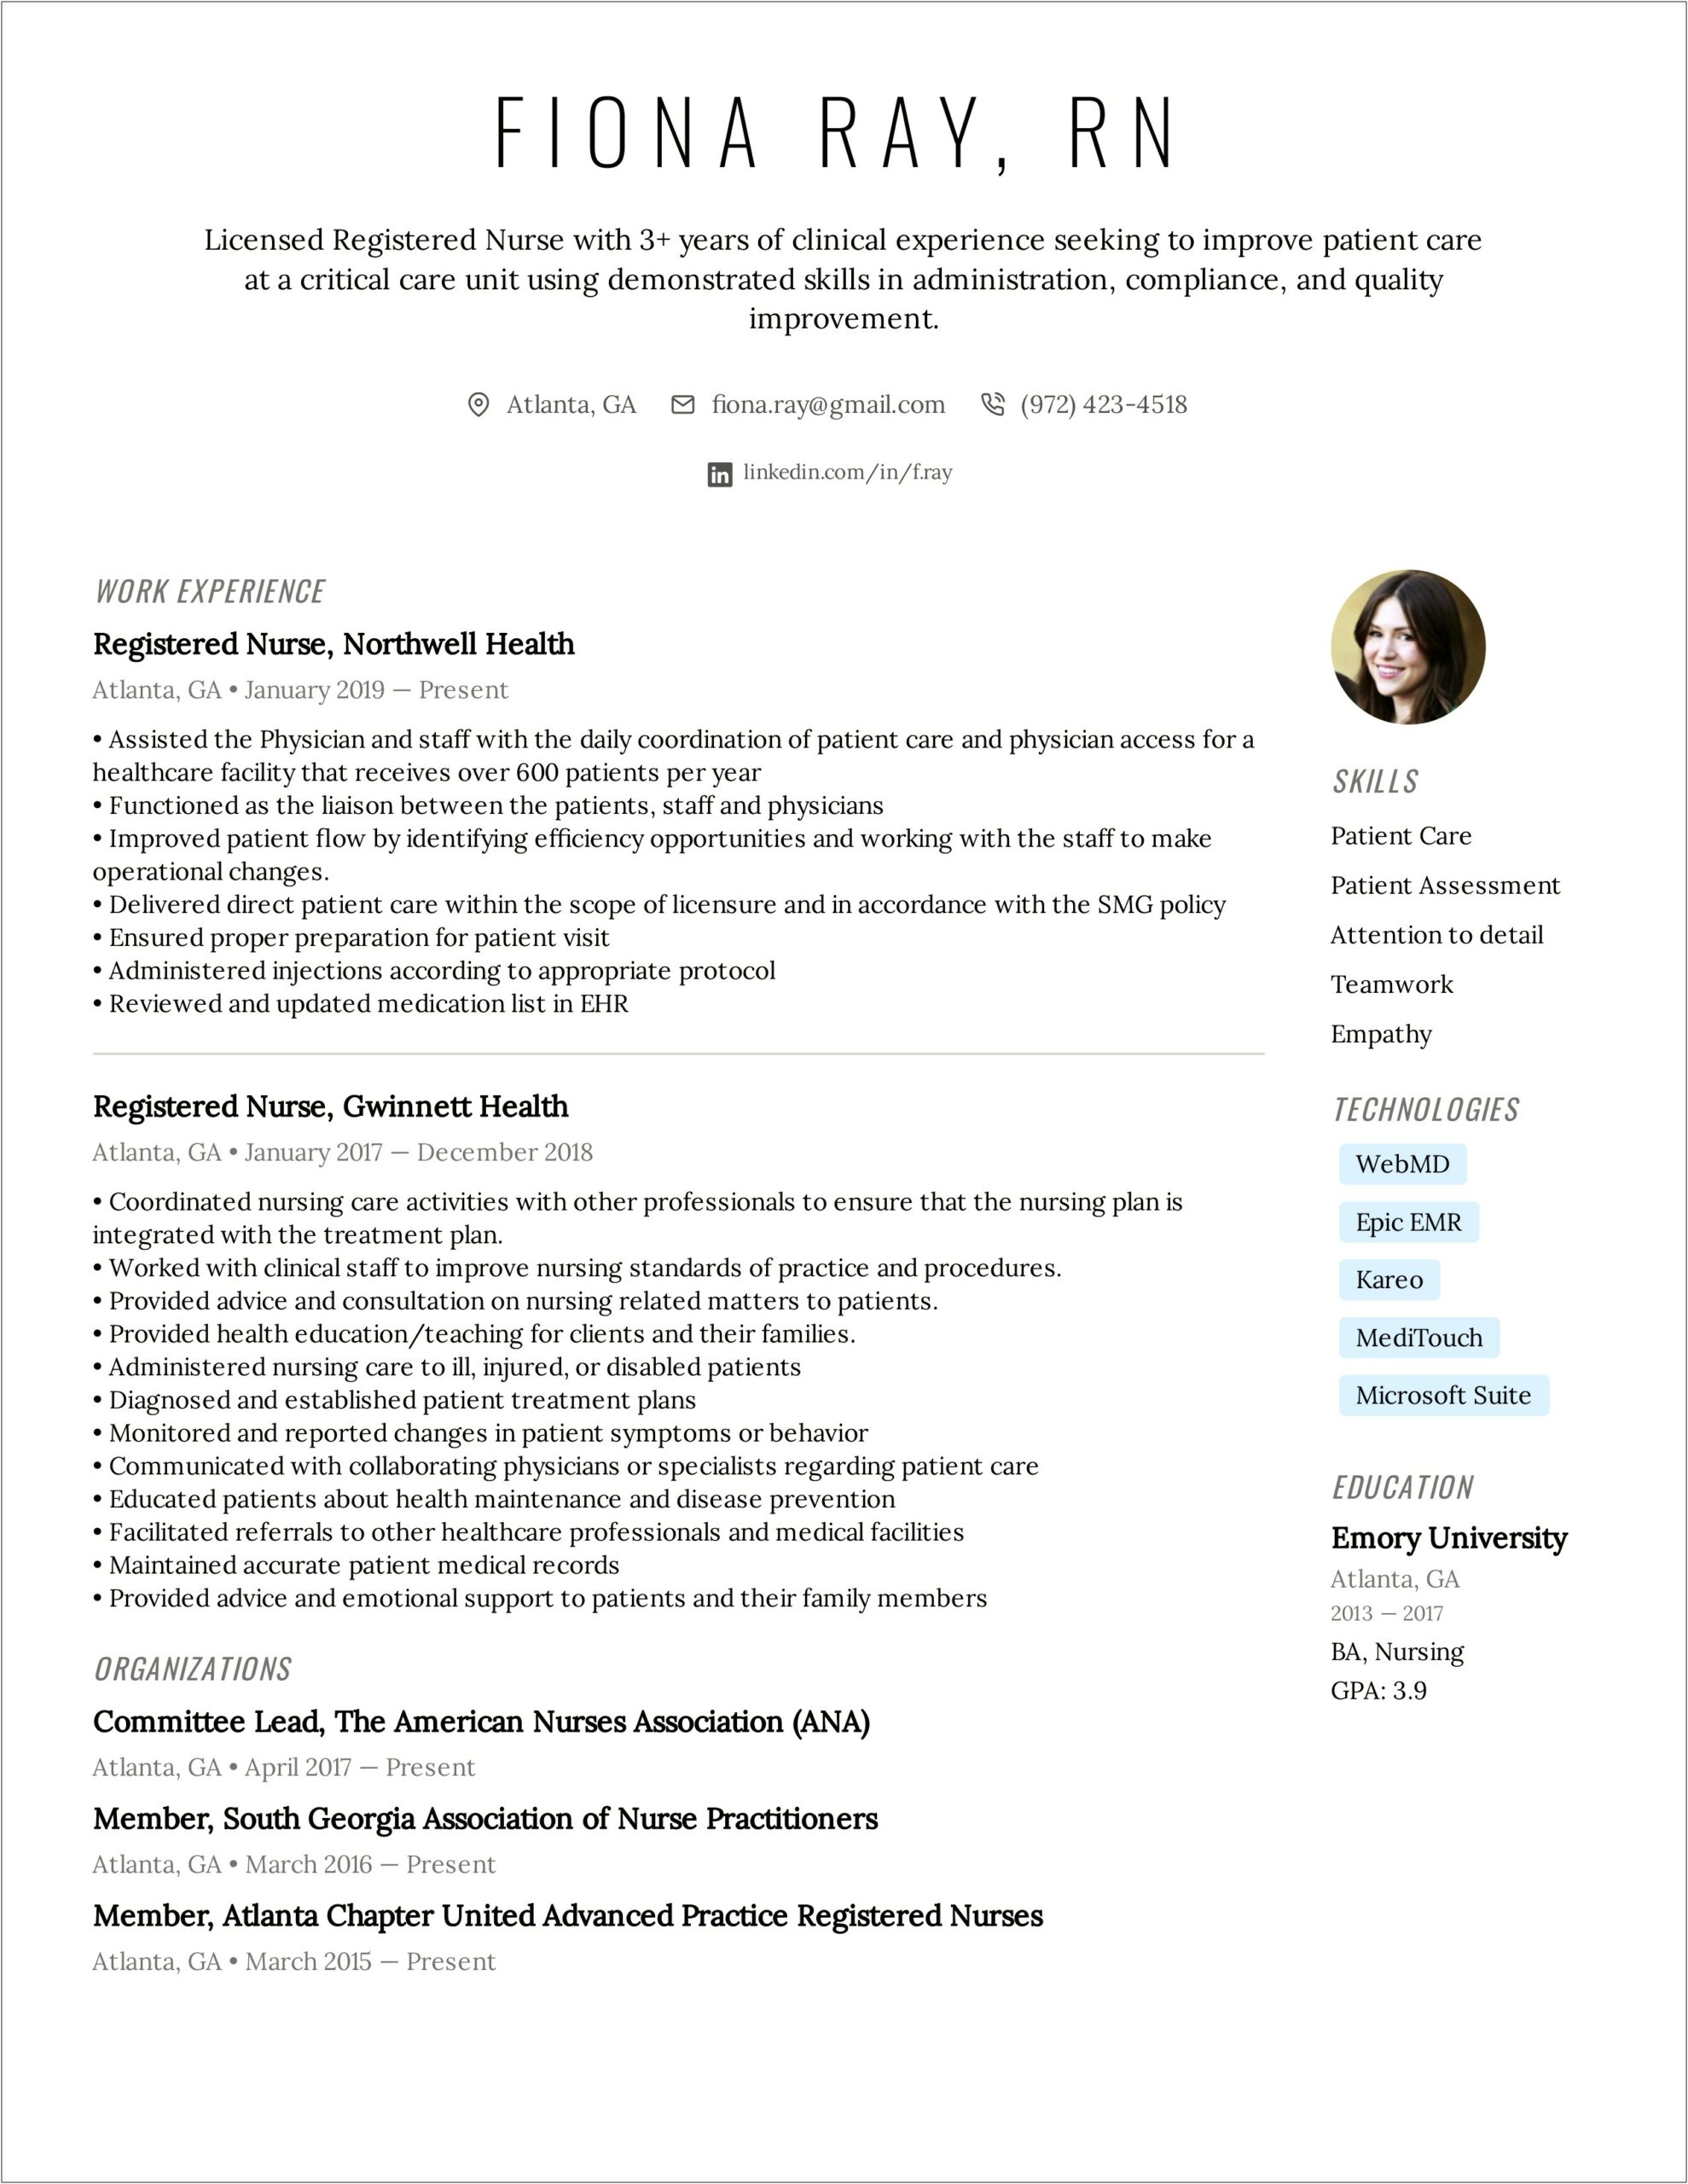 Job Related Training Examples For Resume